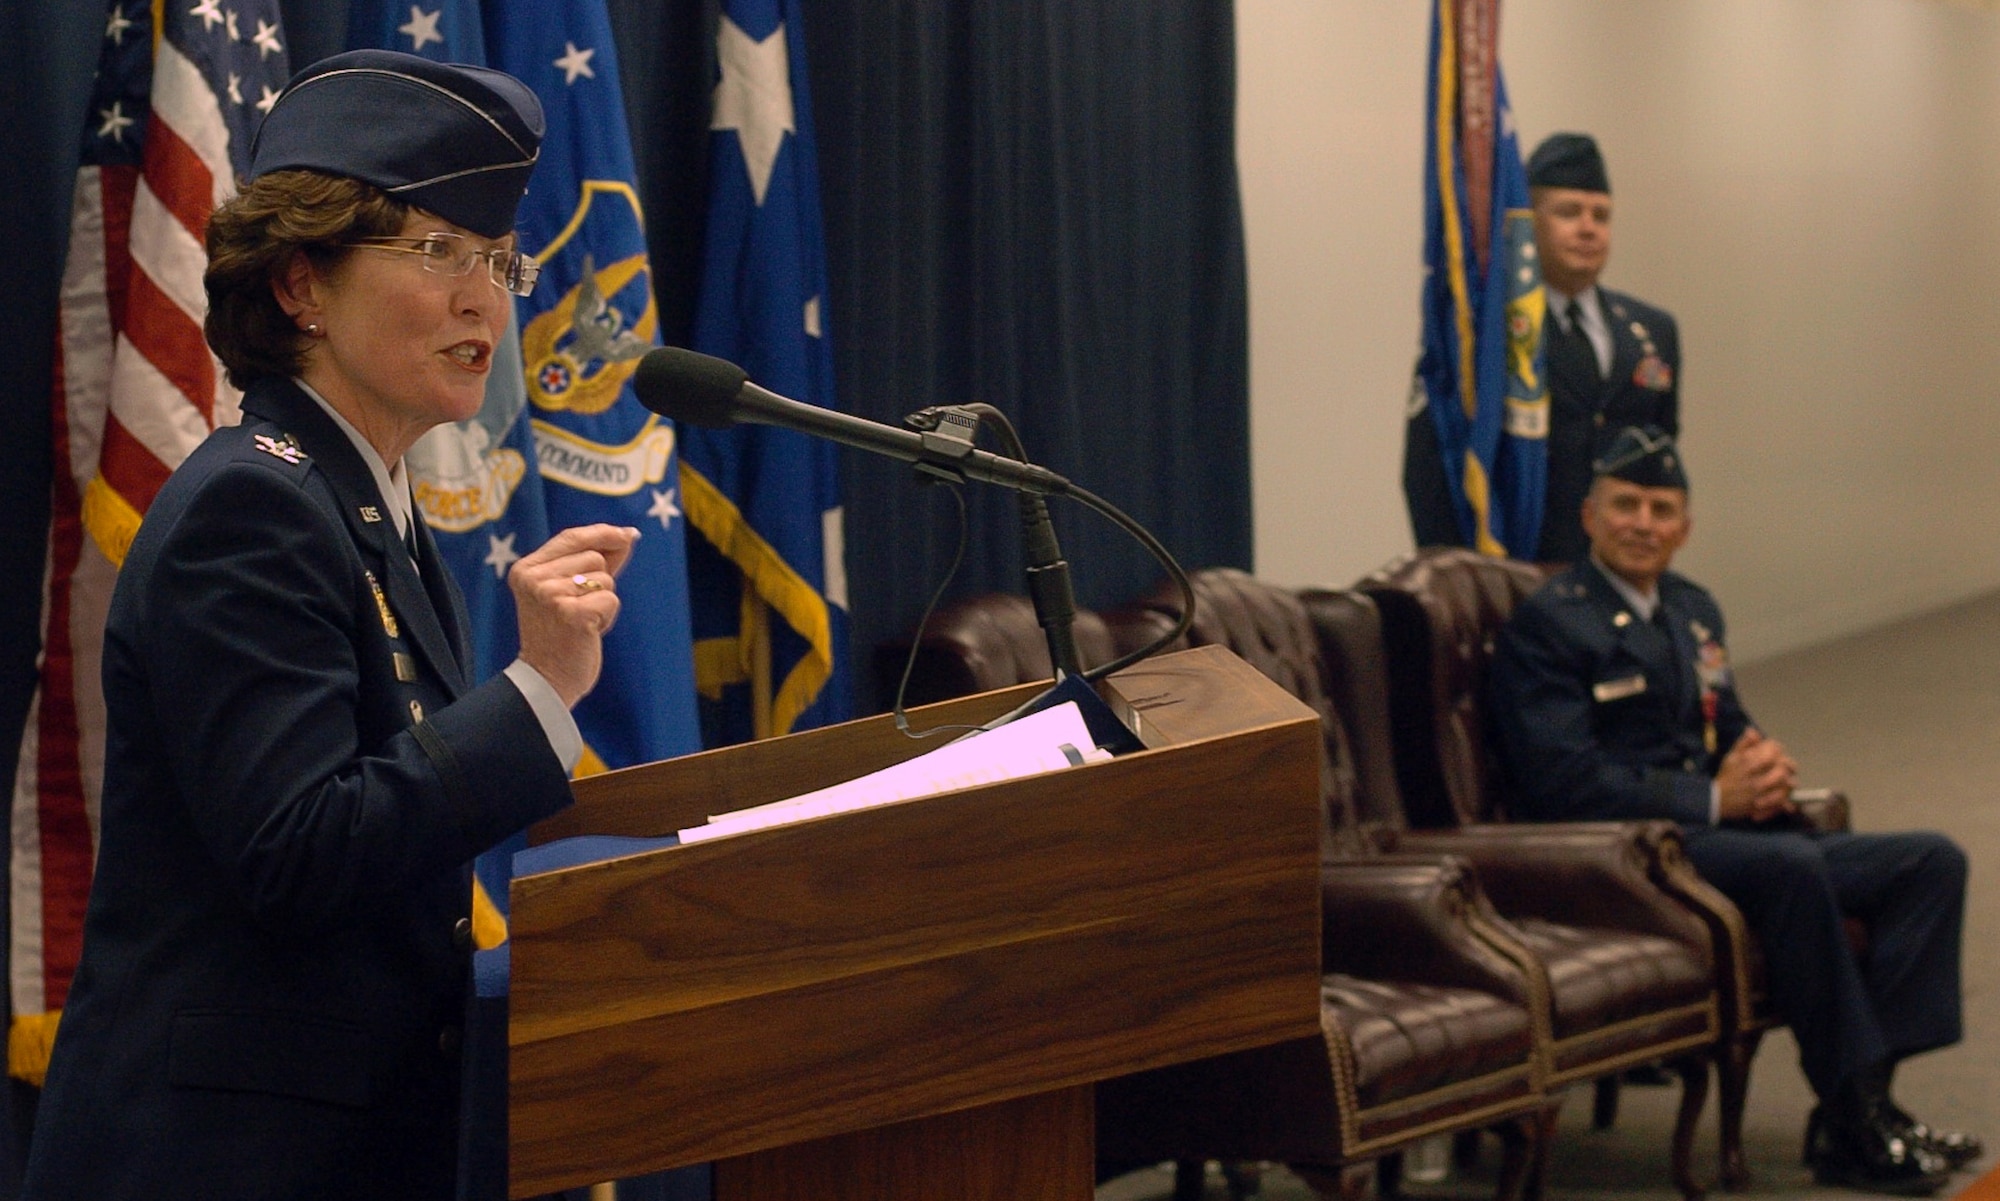 Col. Patricia Blassie adresses the Air Reserve Personnel Center after assuming command of the center Nov. 29, 2010. Observing is Brig. Gen. Kevin Pottinger, the former center commander, who will serve as the mobilization assistant to the Assistant Secretary of the Air Force for Manpower and Reserve Affairs at the Pentagon. Colonel Blassie served as the executive officer to the Chief of Air Force Reserve, Robins Air Force Base, Ga., before assuming command at ARPC. (U.S. Air Force photo/Greg Simmonds)